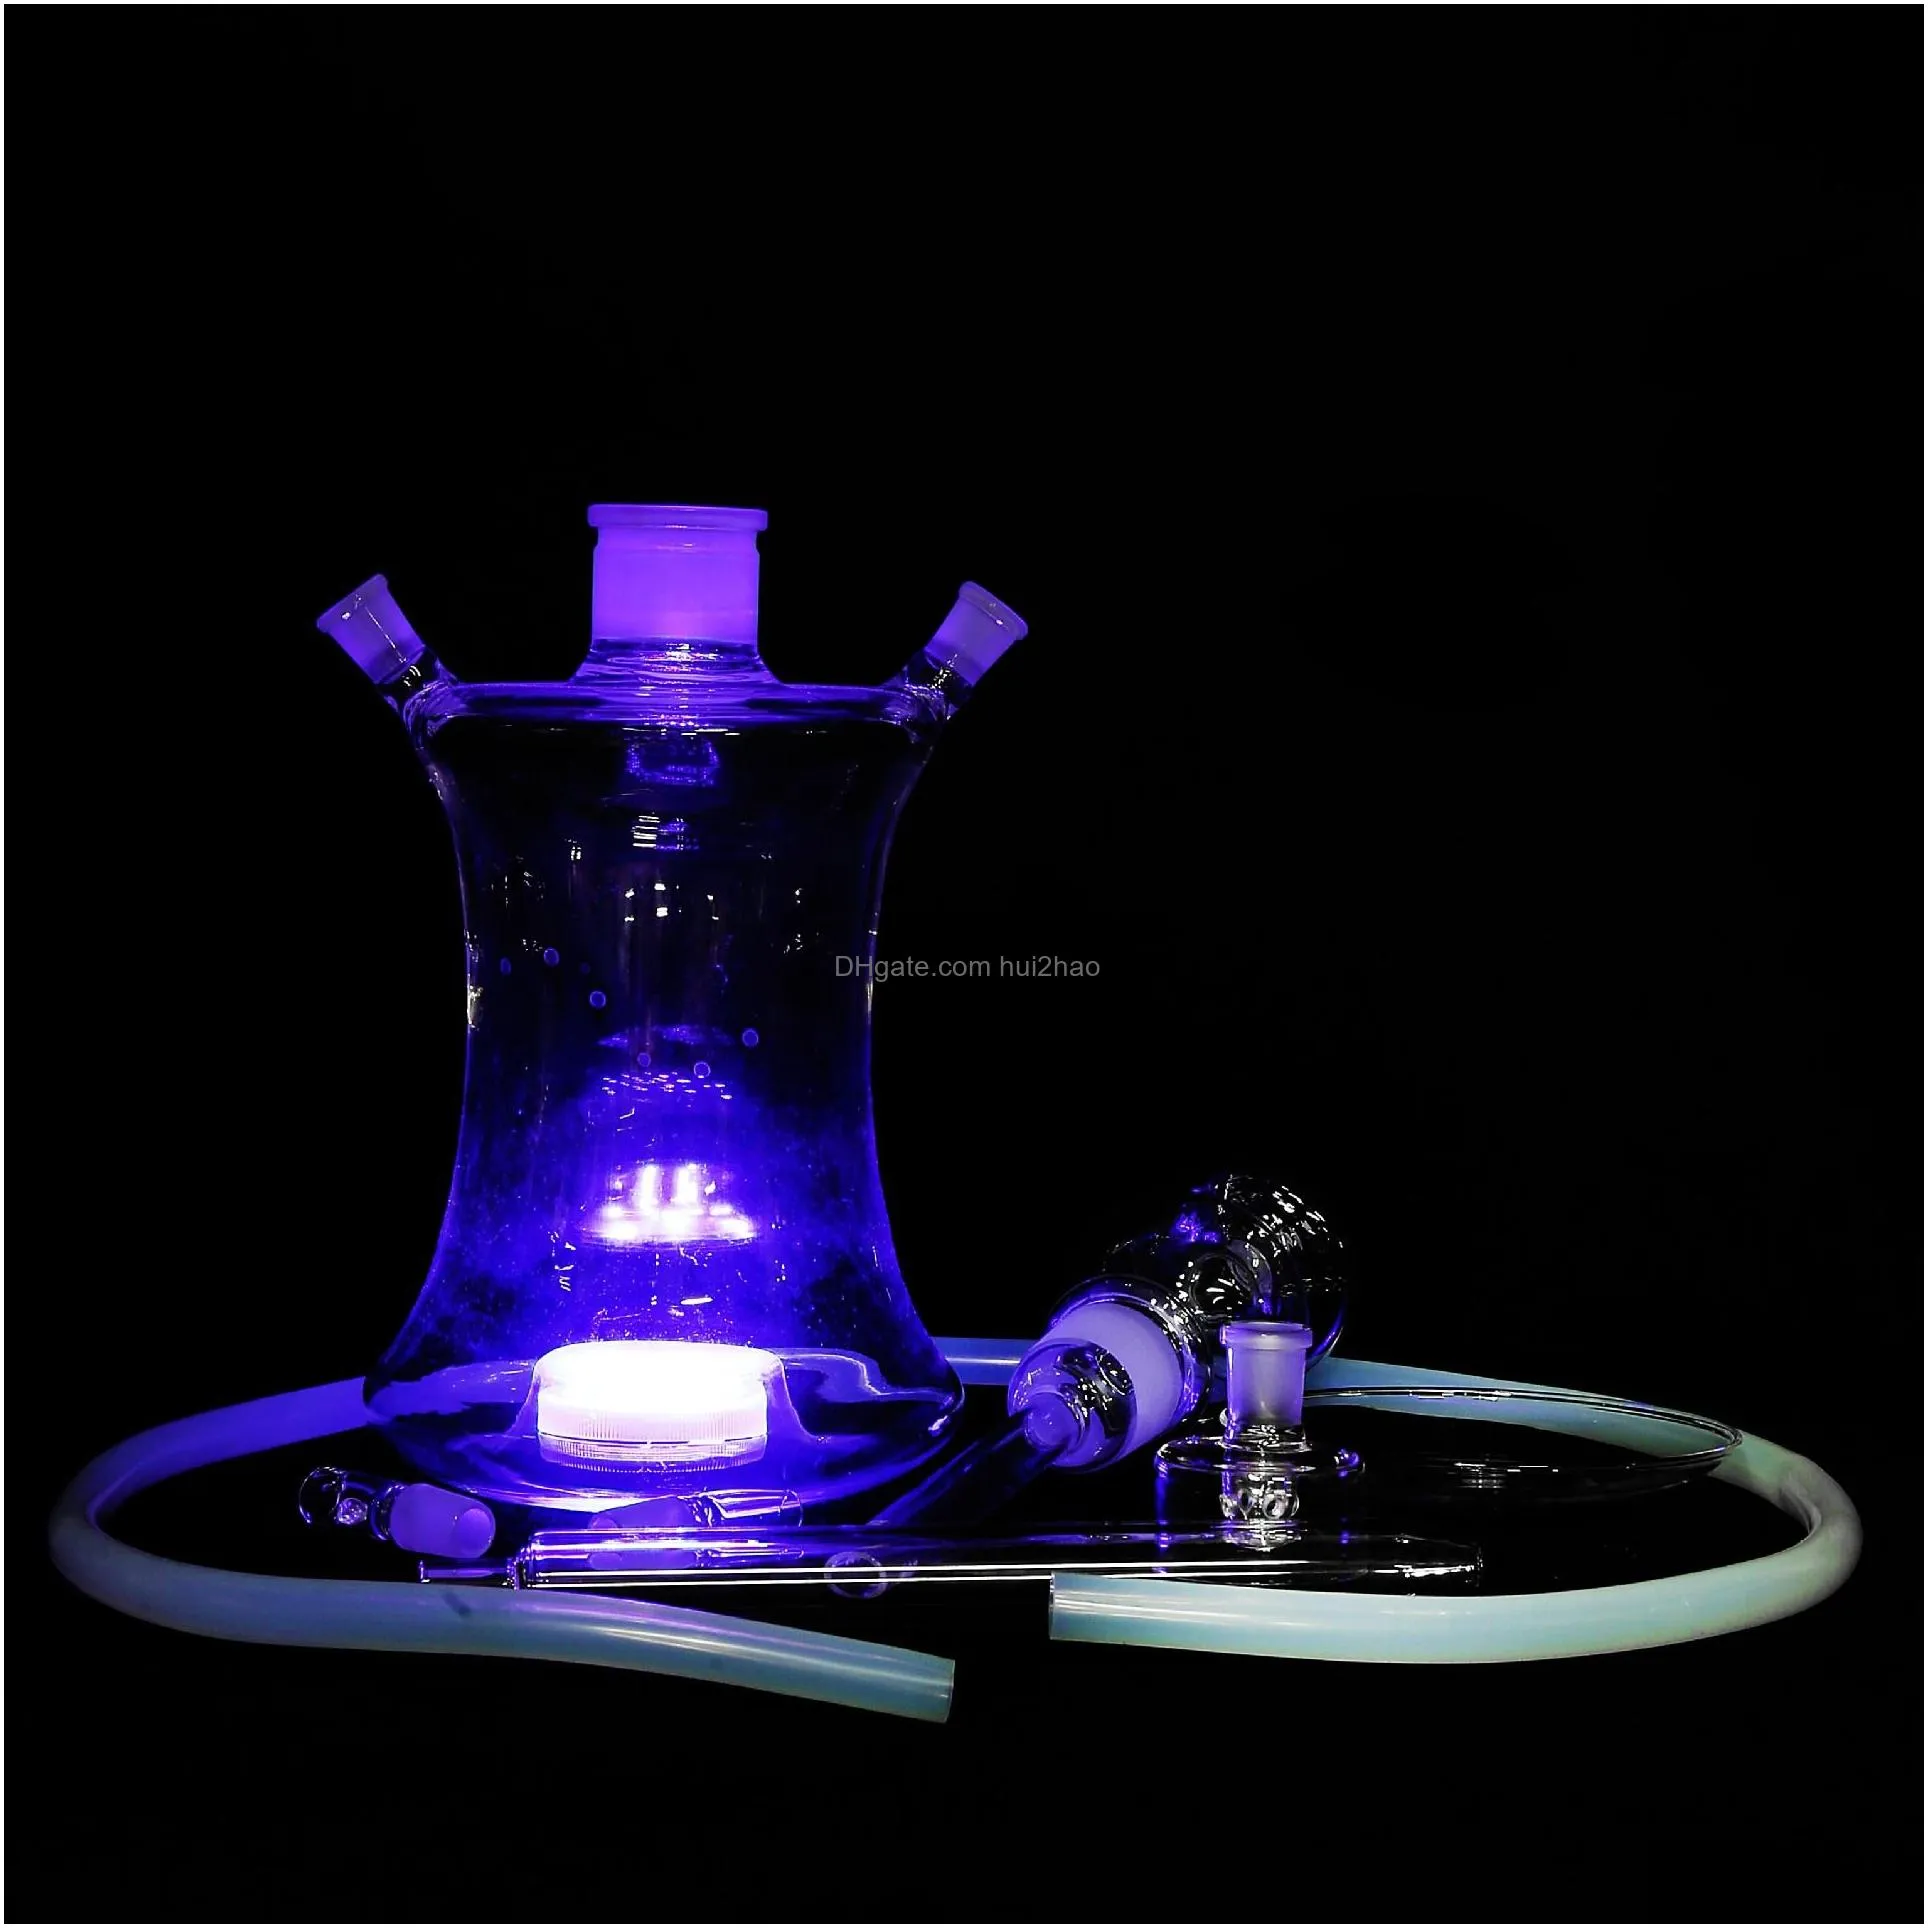 53cm tall hookah with light glass water smoking cigaret filter holder tobacco pipes portable 2021 smoke accessories in stock